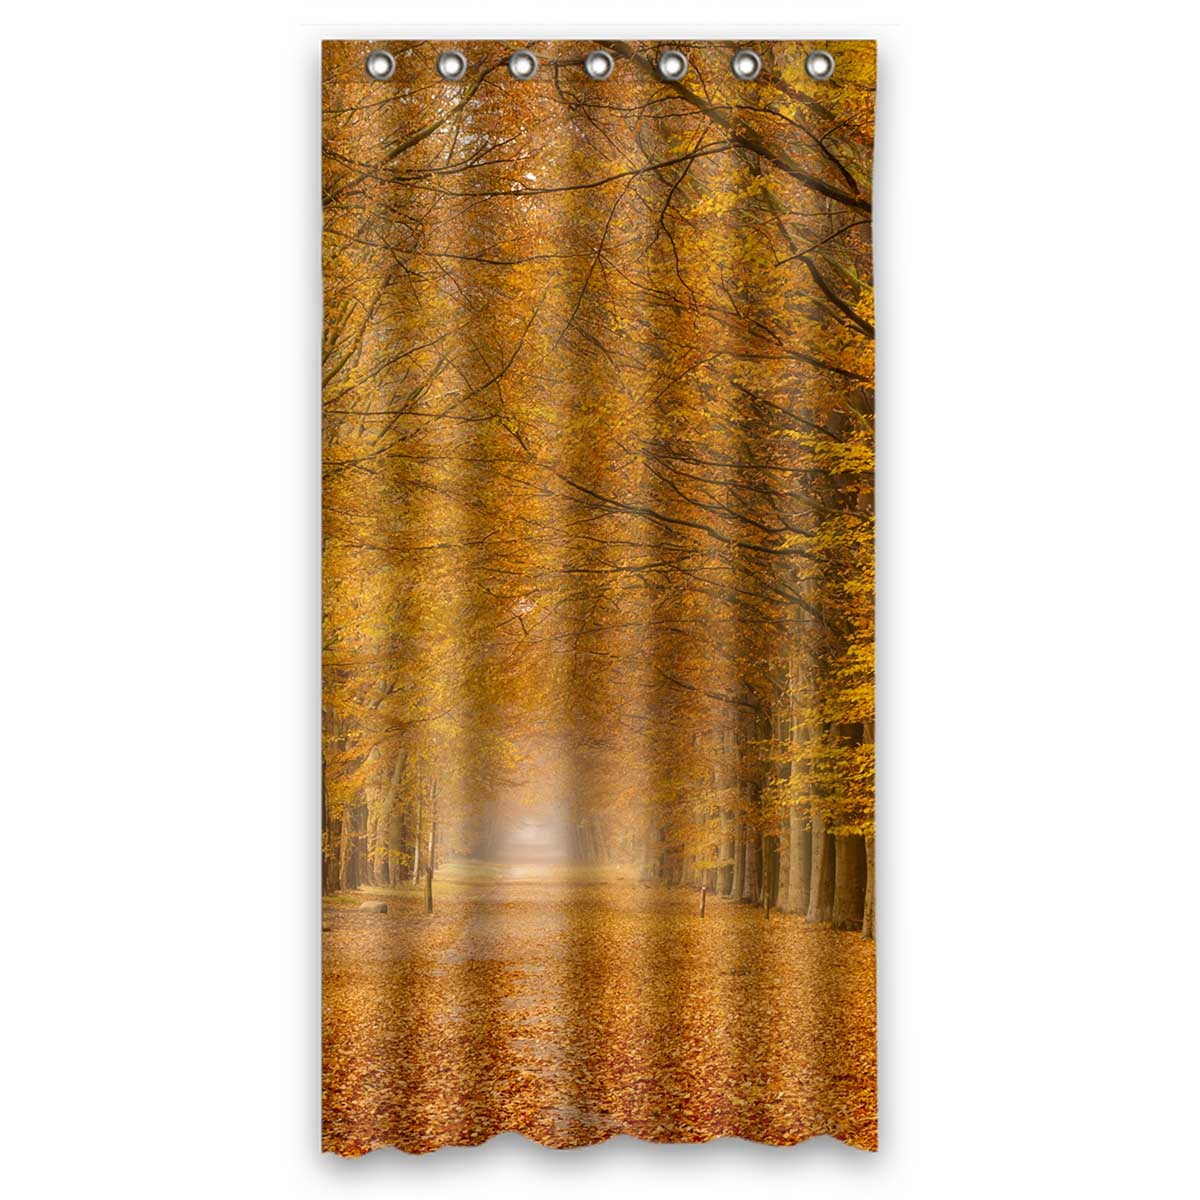 Details about   Autumn Forest Path Shower Curtain Bathroom Decor Fabric & 12hooks 71in